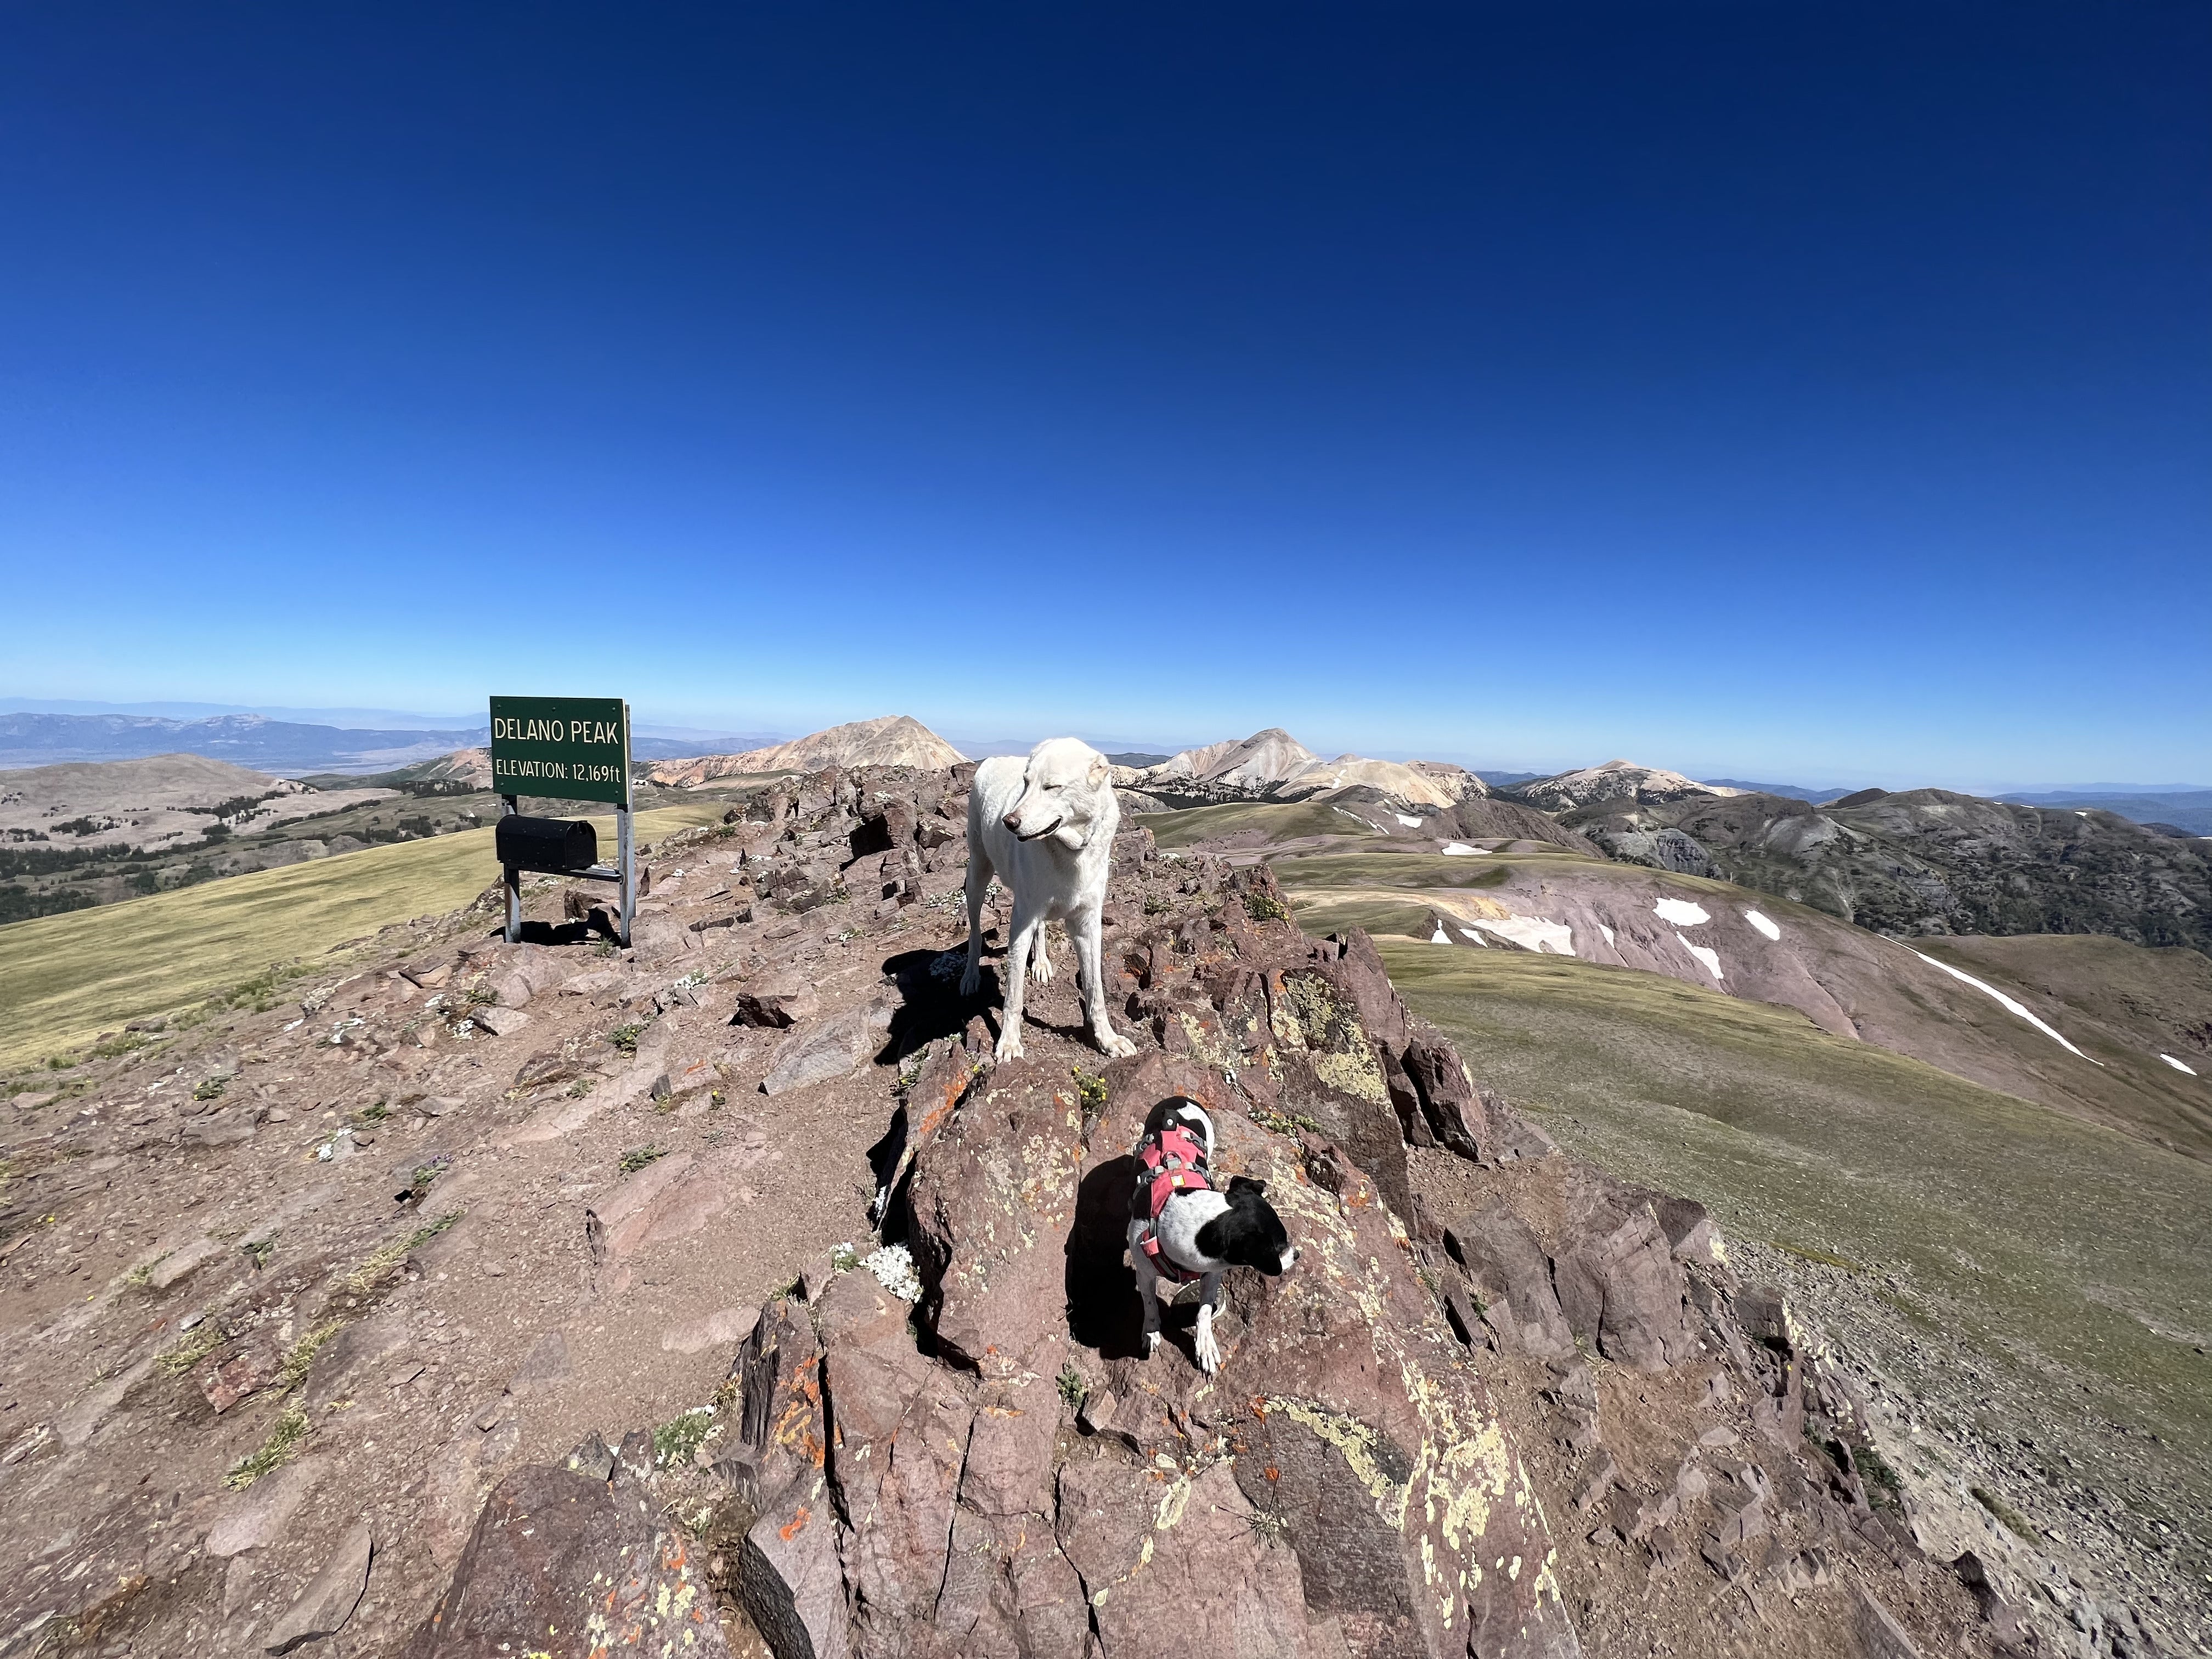 Two dogs stand at the top of Delano Peak in Utah. 